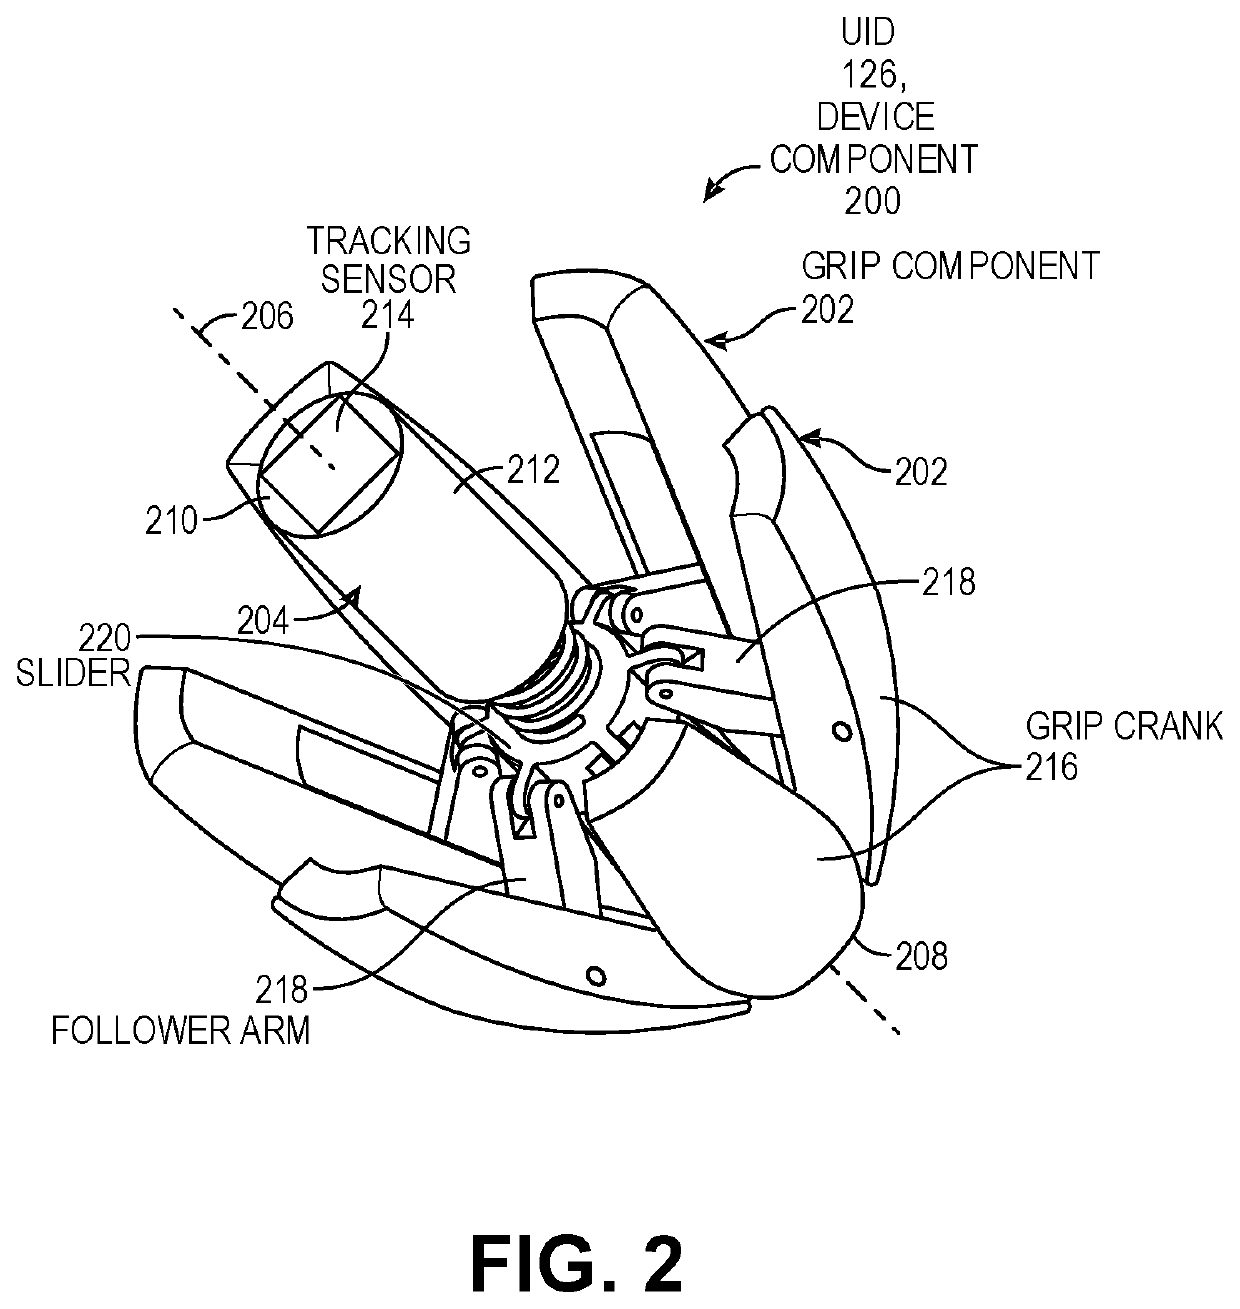 Wearable user interface device